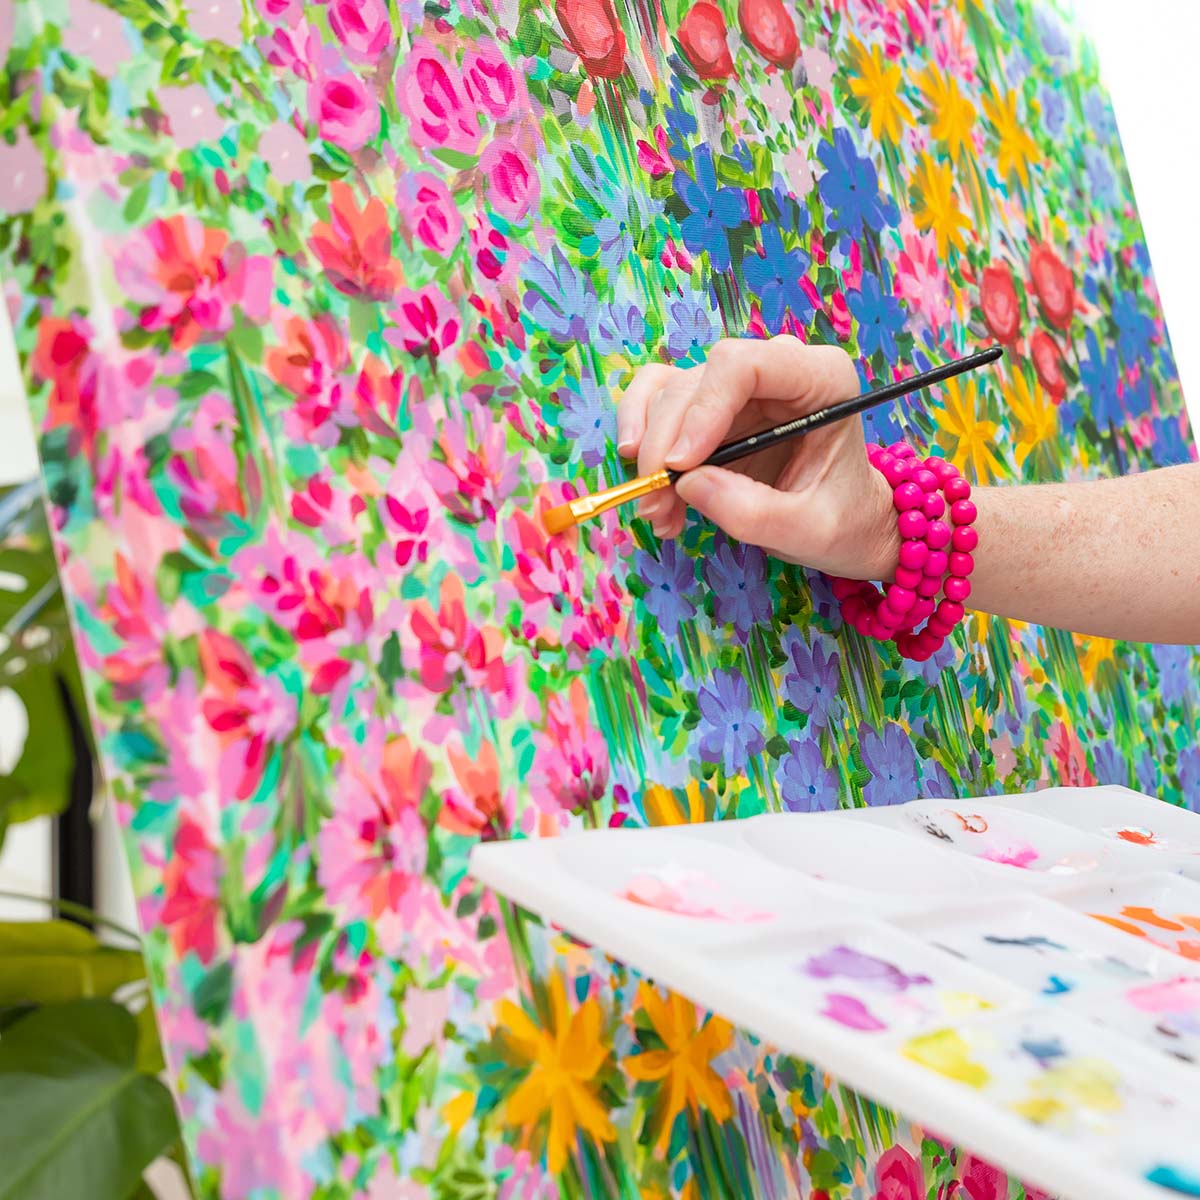 Sam Matthews Painting on her floral Canvas